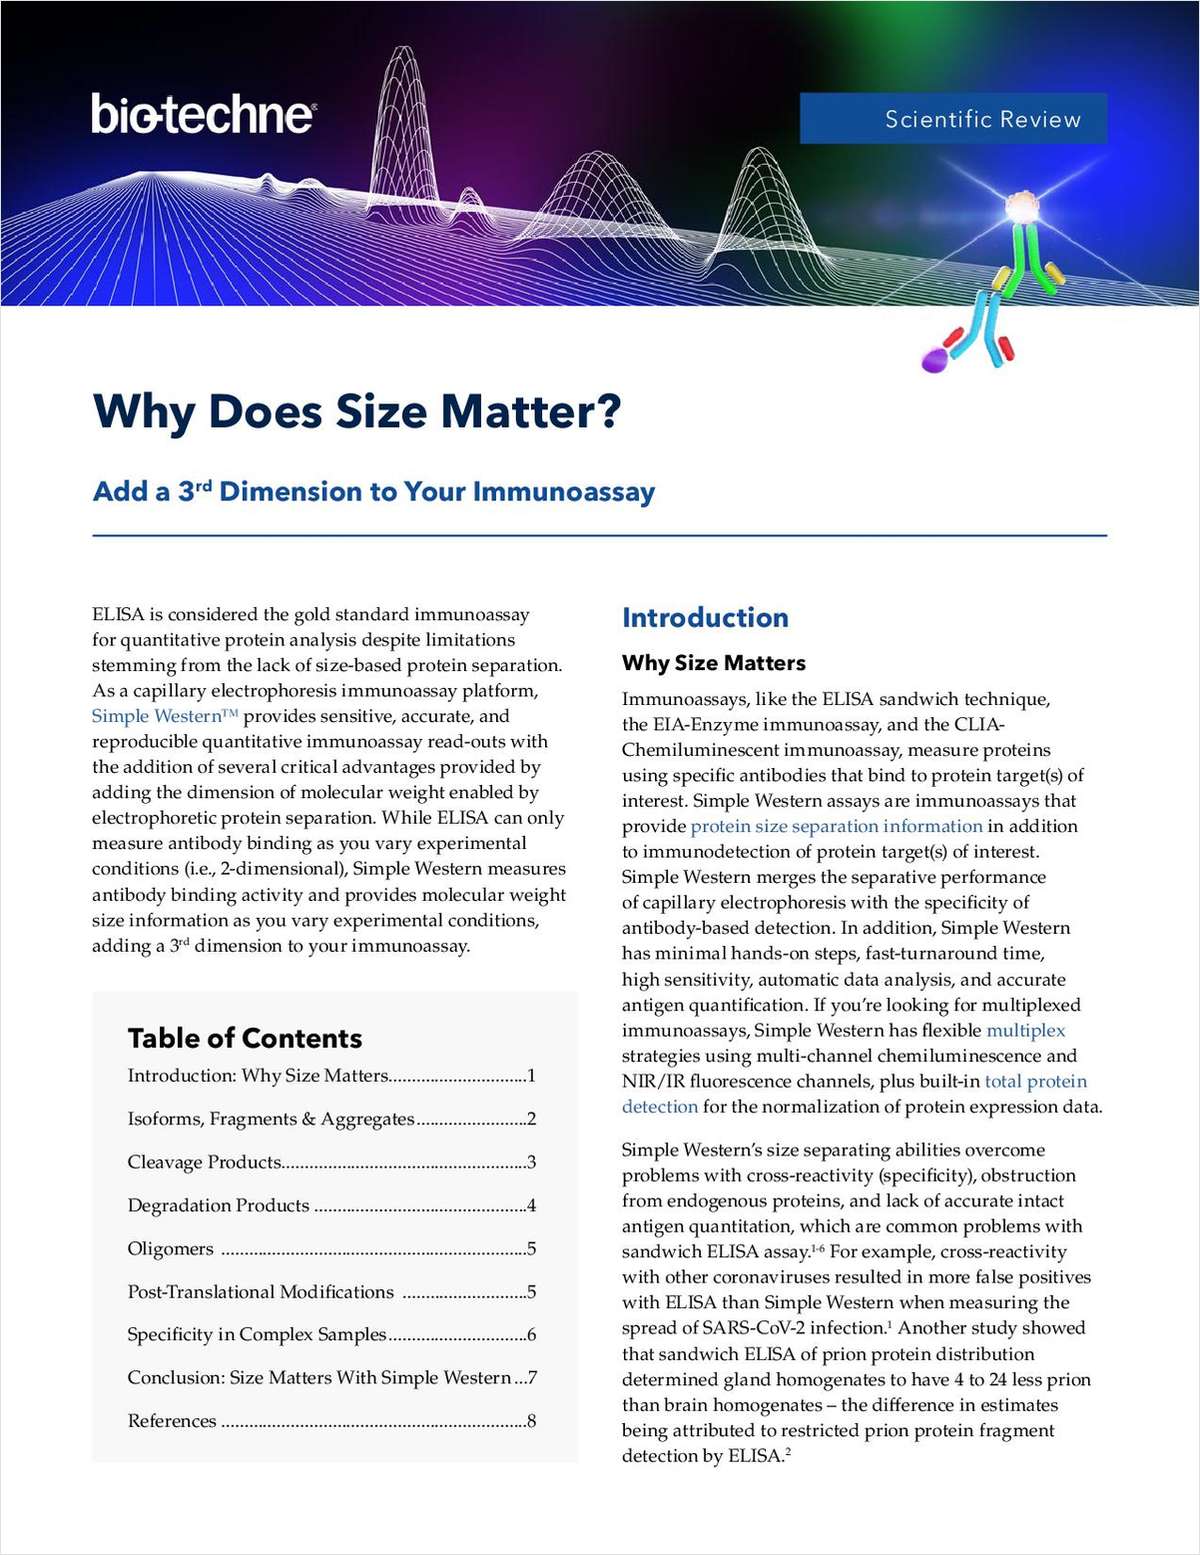 Why Does Size Matter? Add a 3rd Dimension to Your Immunoassay